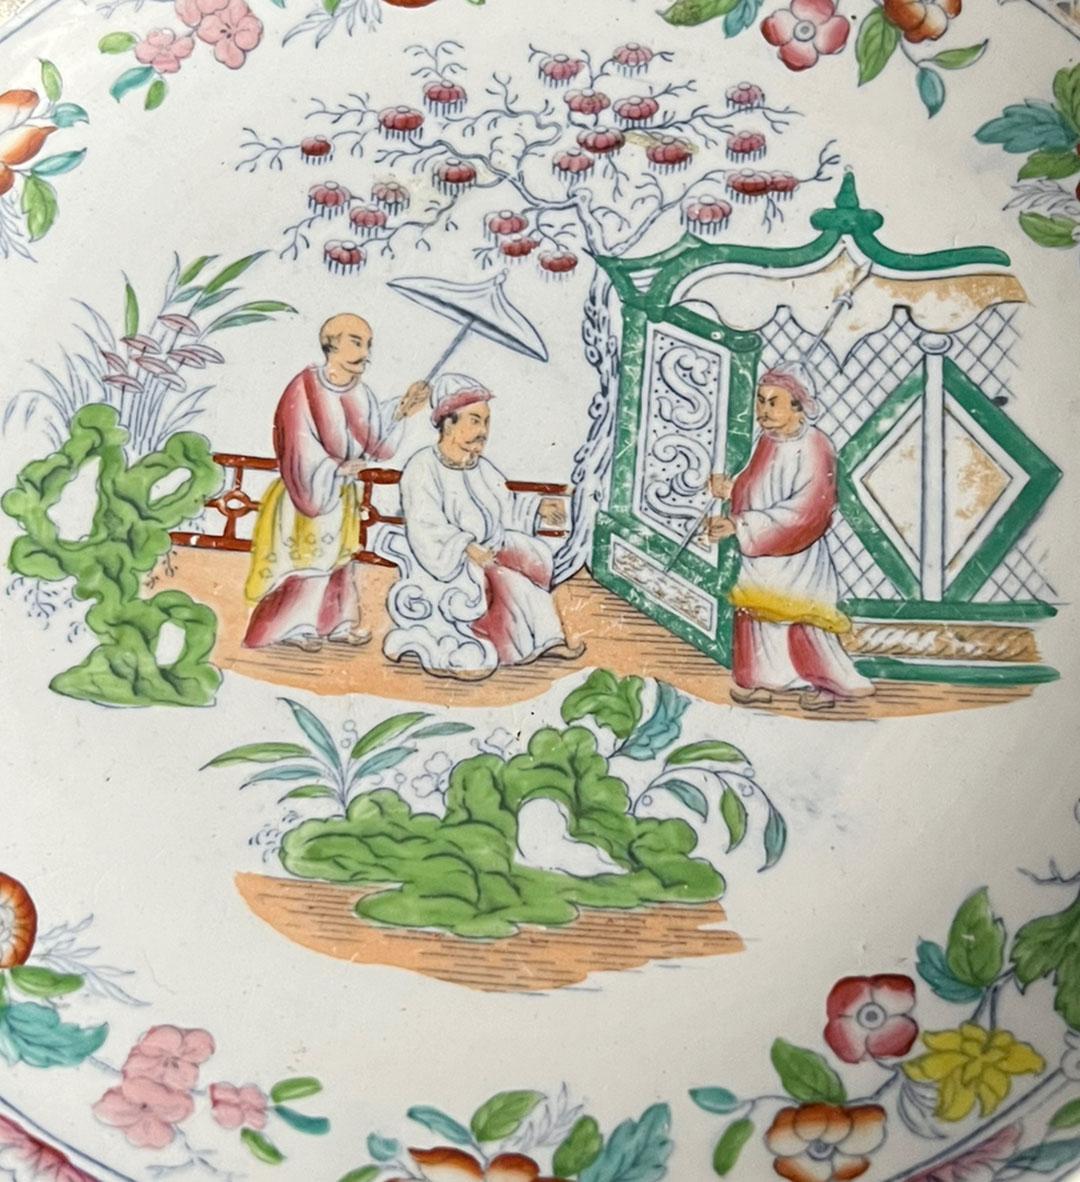 Vibrant green accents on this garden scene plate appearing to show an emperor being shaded. Yellow, pale pink florals throughout. Some gold to rim. 1868 date on reverse.